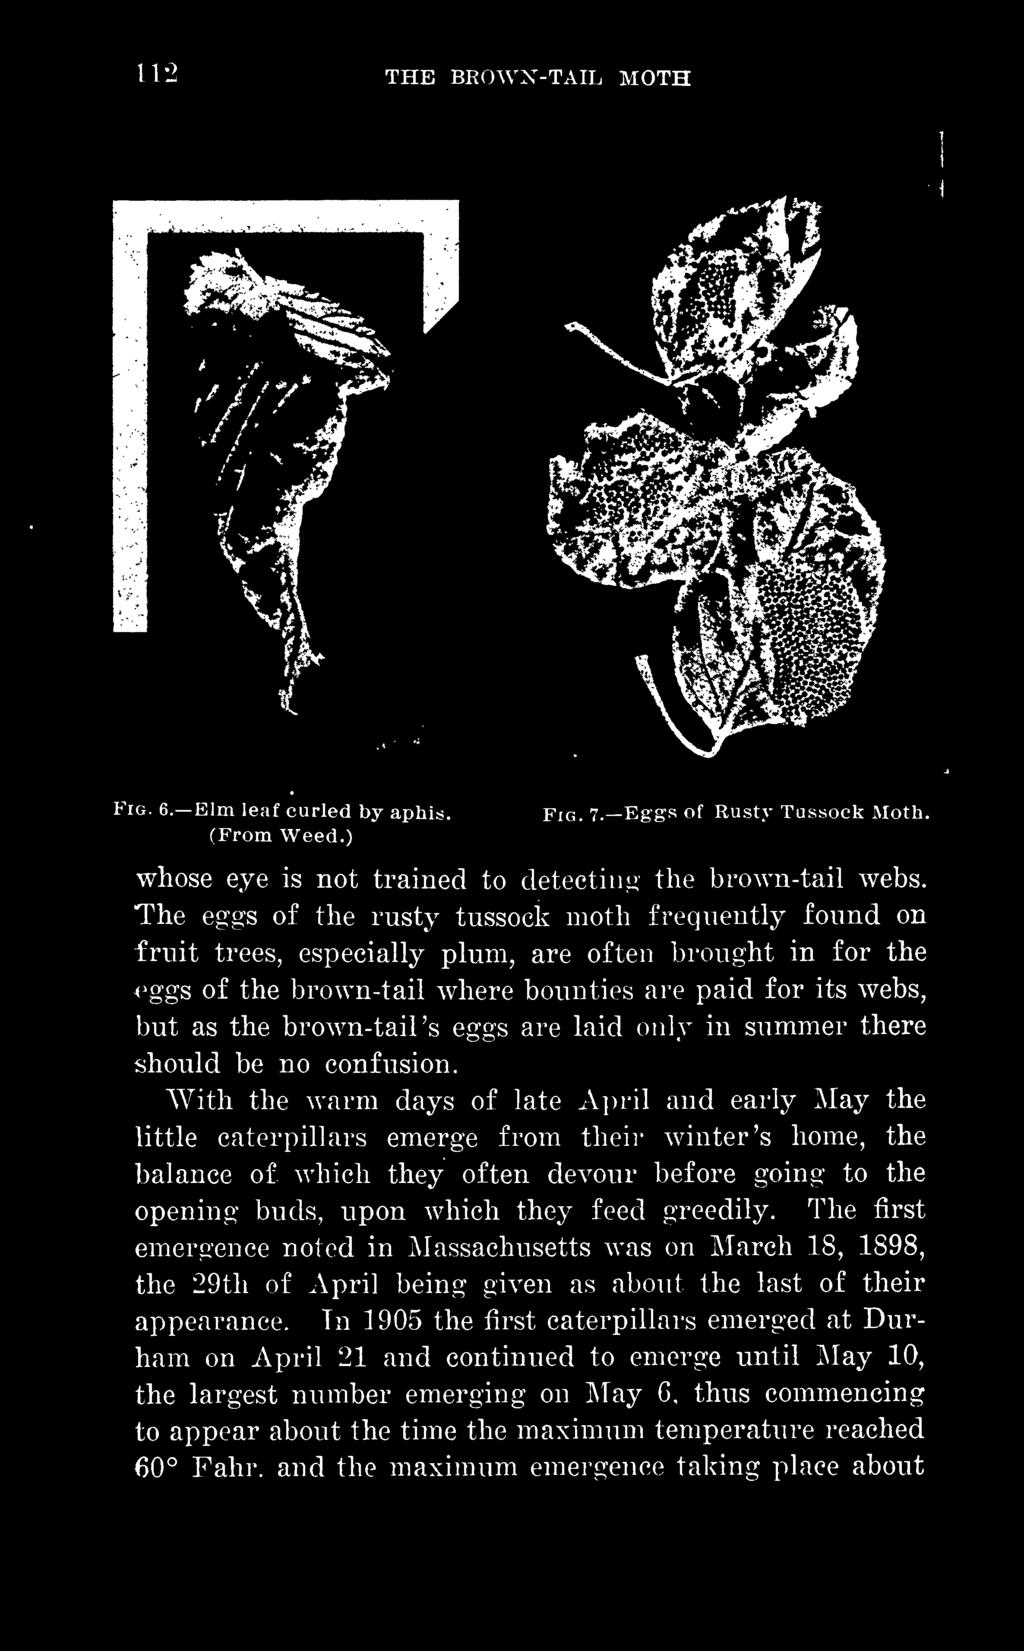 buds, upon which they feed greedily. The first emergence noted in Massachusetts was on March 18, 1898, the 29th of April being given as about the last of their appearance.